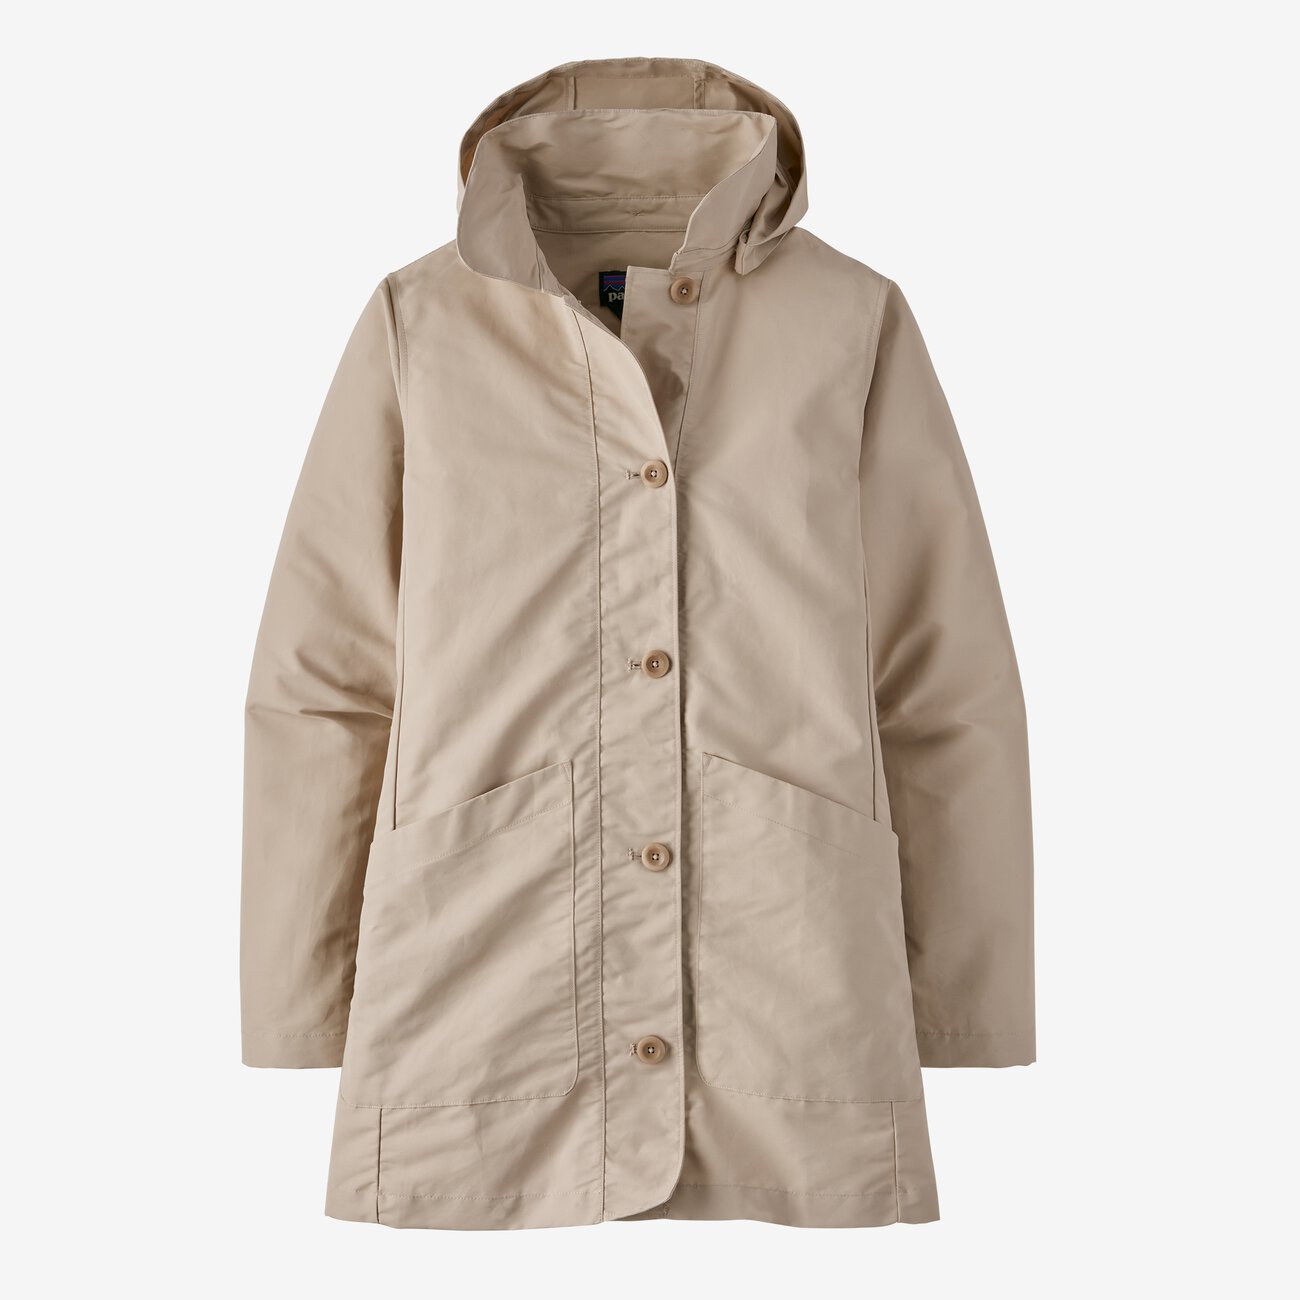 Patagonia Women's Transitional Trench Jacket